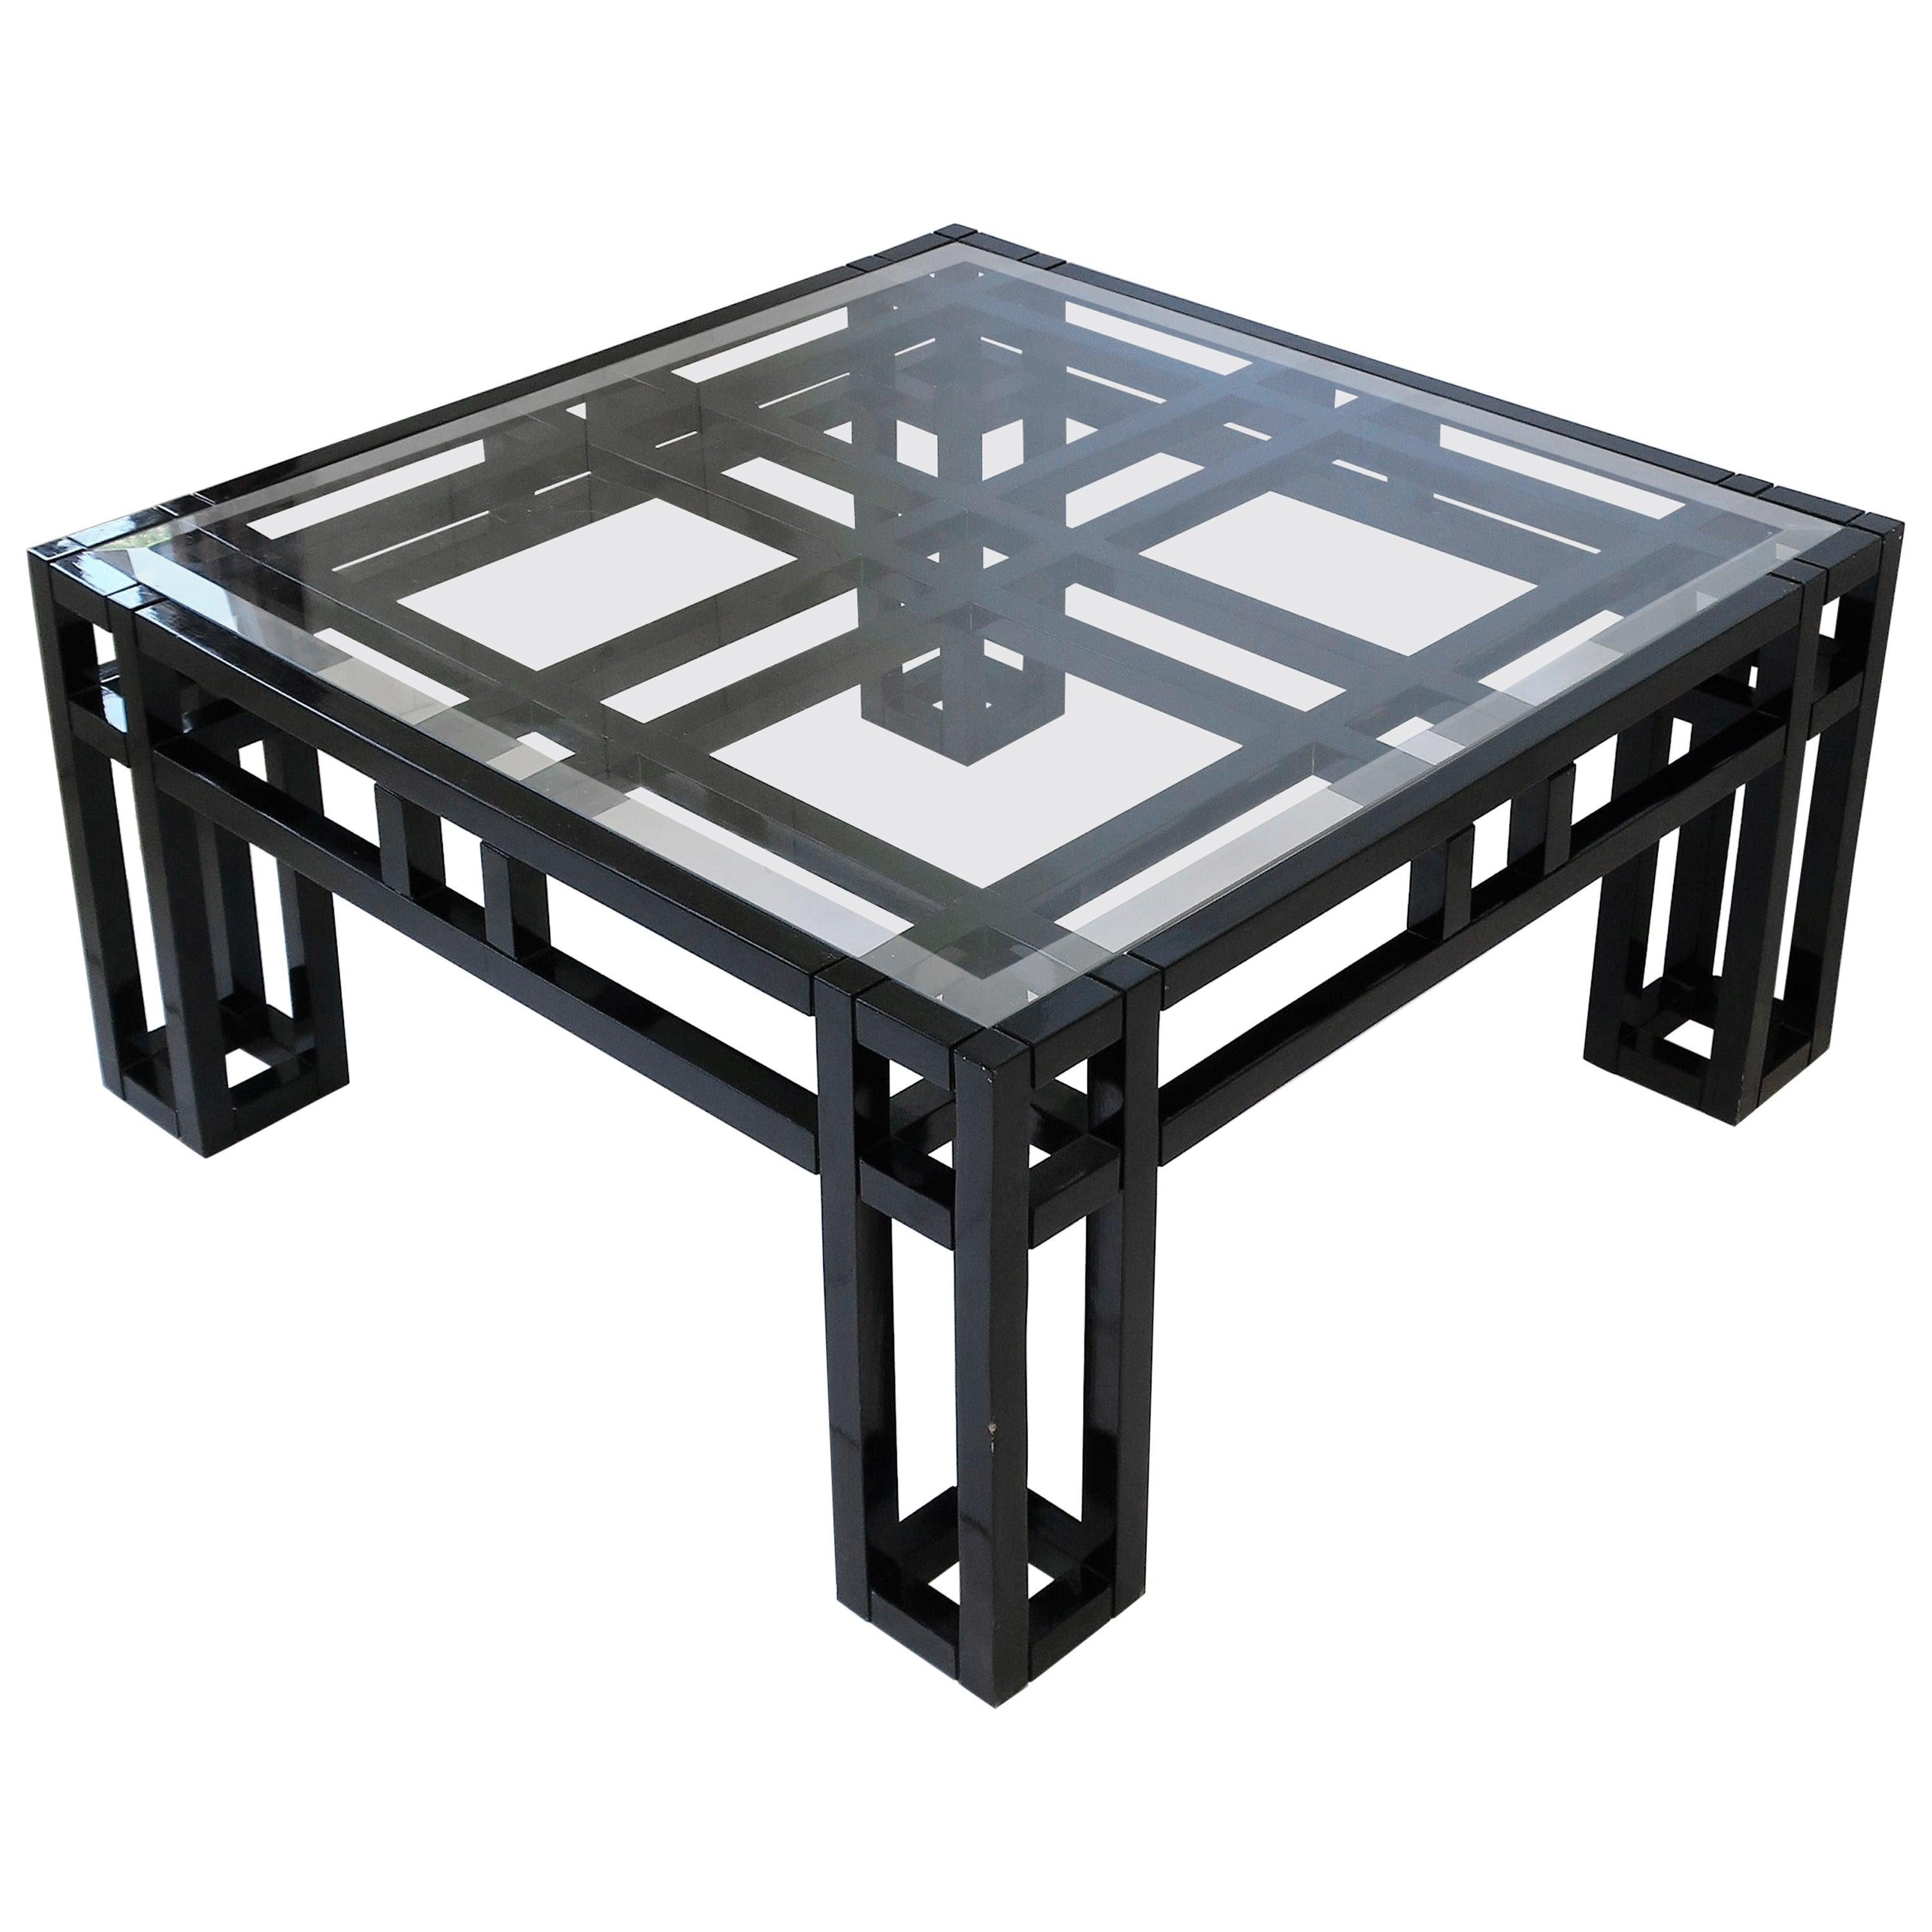 1980s Postmodern Black Lacquer and Glass Geometric Square Coffee Table